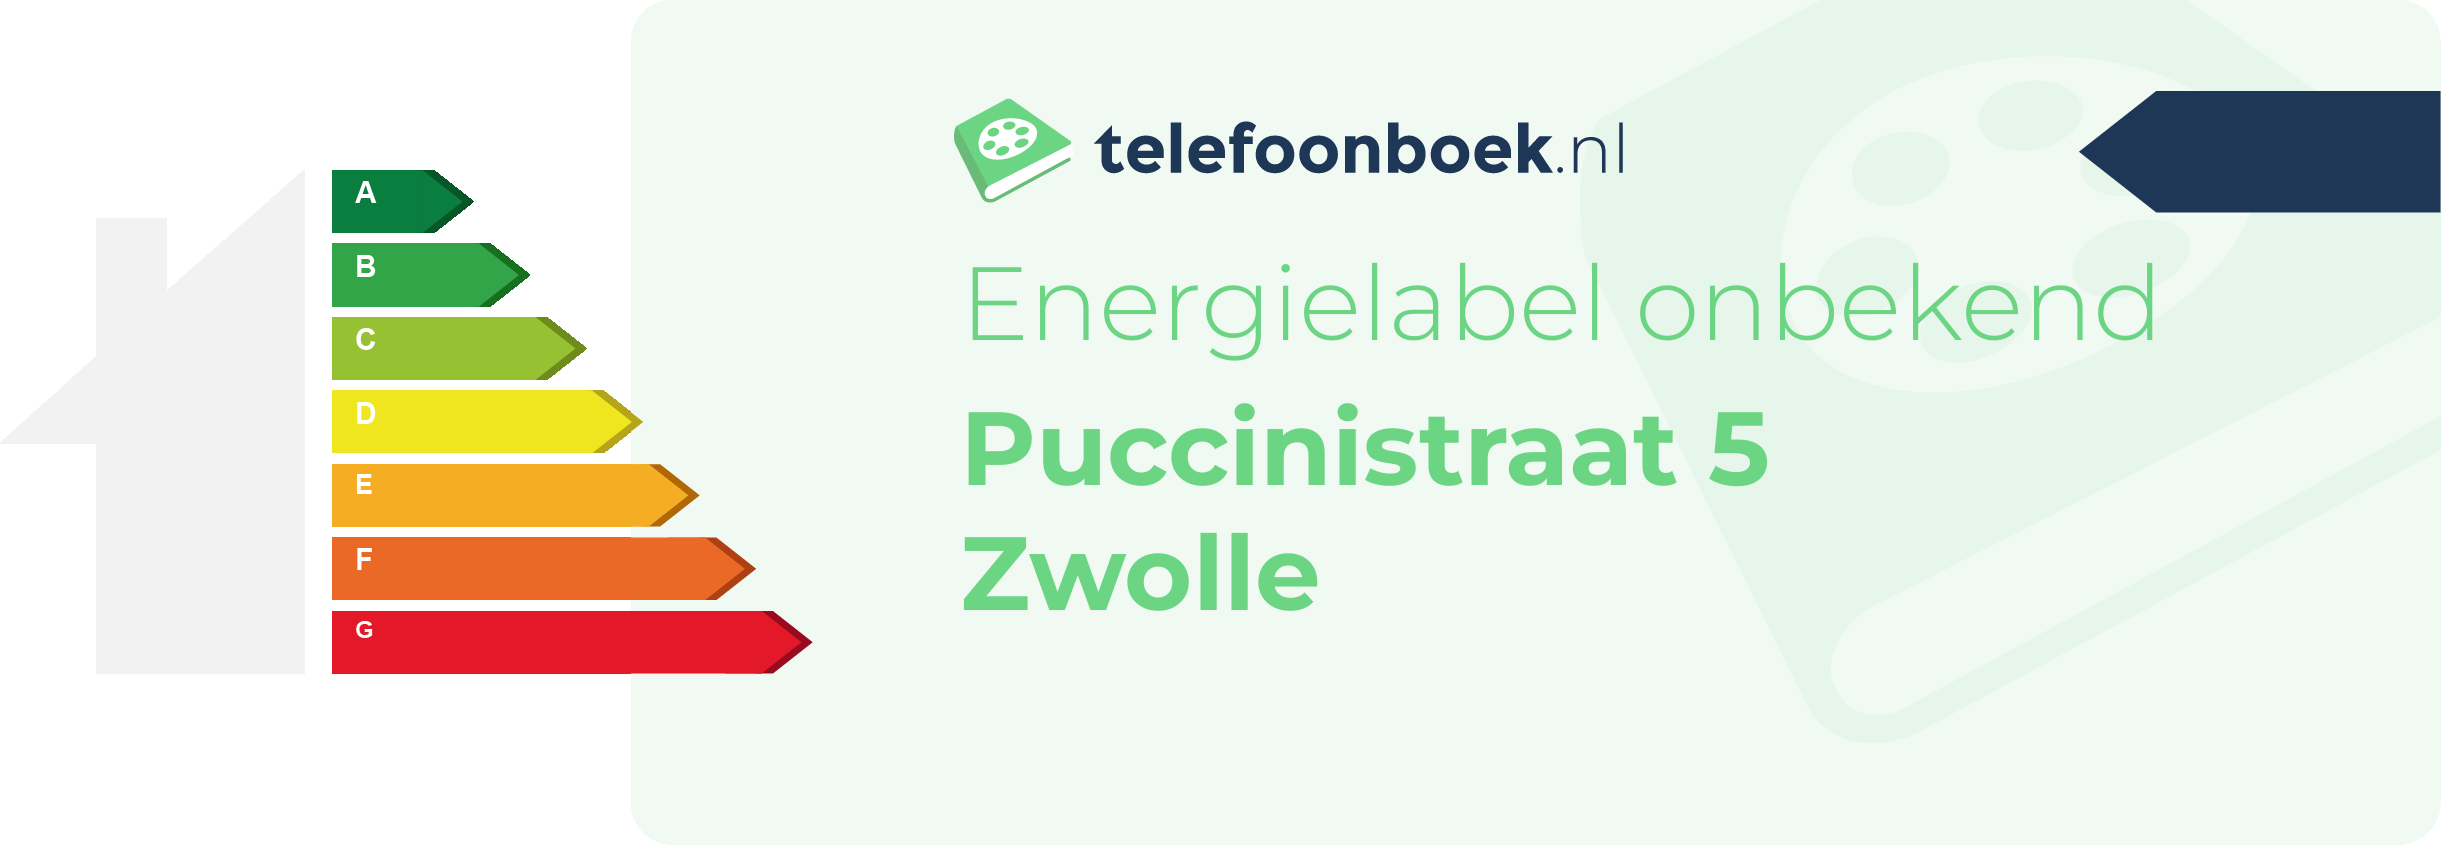 Energielabel Puccinistraat 5 Zwolle